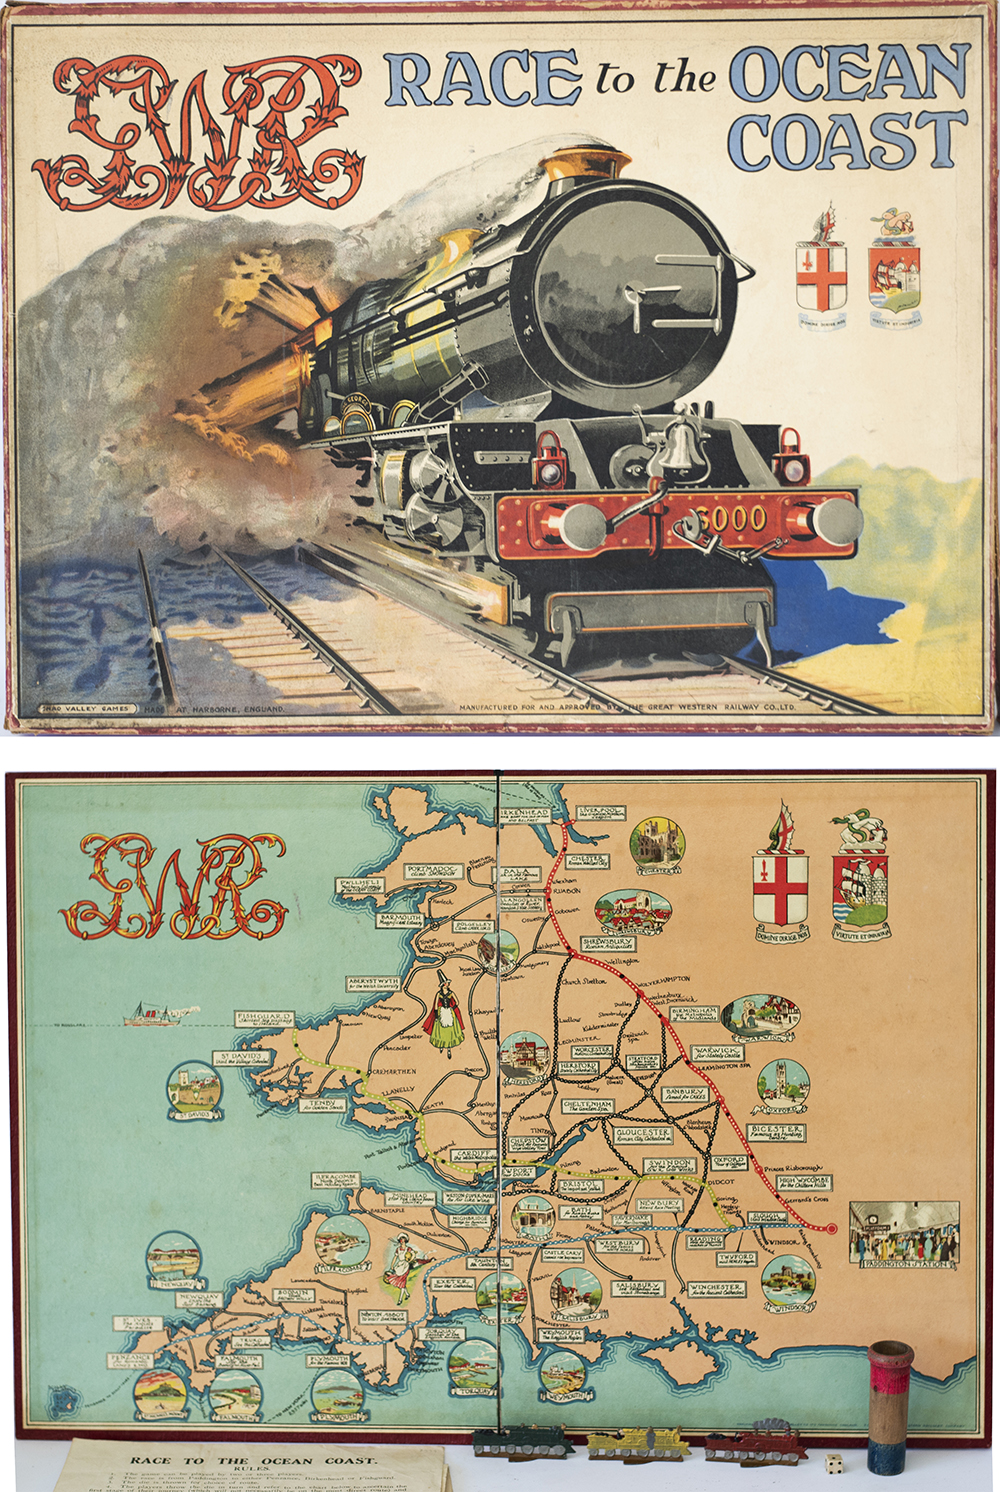 GWR board game RACE TO THE OCEAN COAST manufactured by Chad Valley for the Great Western Railway.